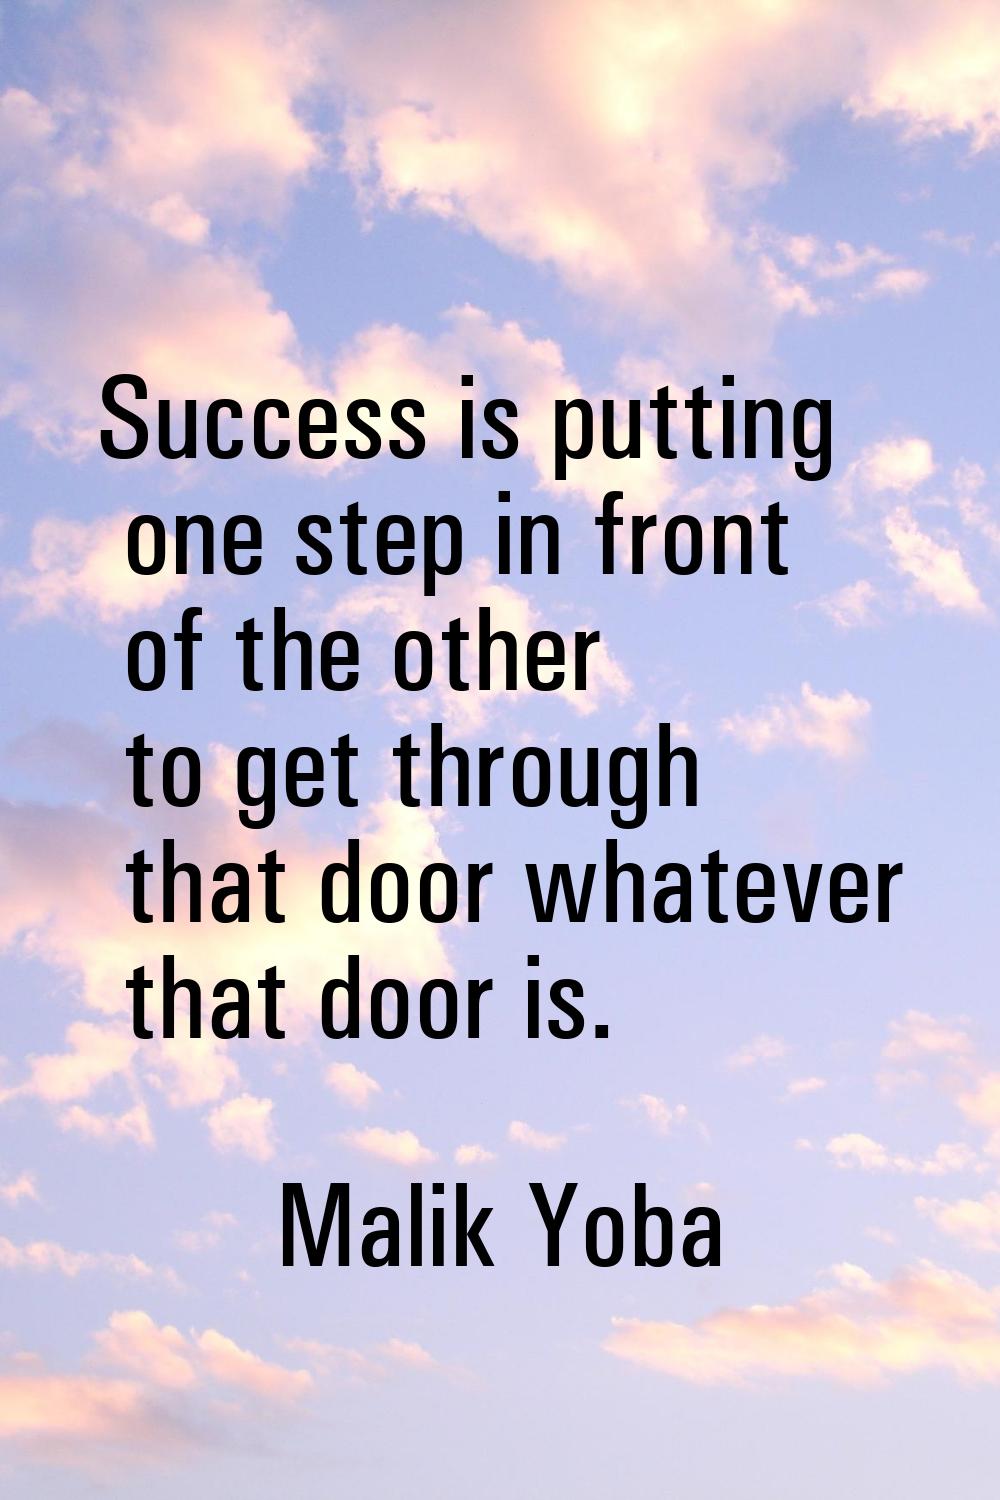 Success is putting one step in front of the other to get through that door whatever that door is.